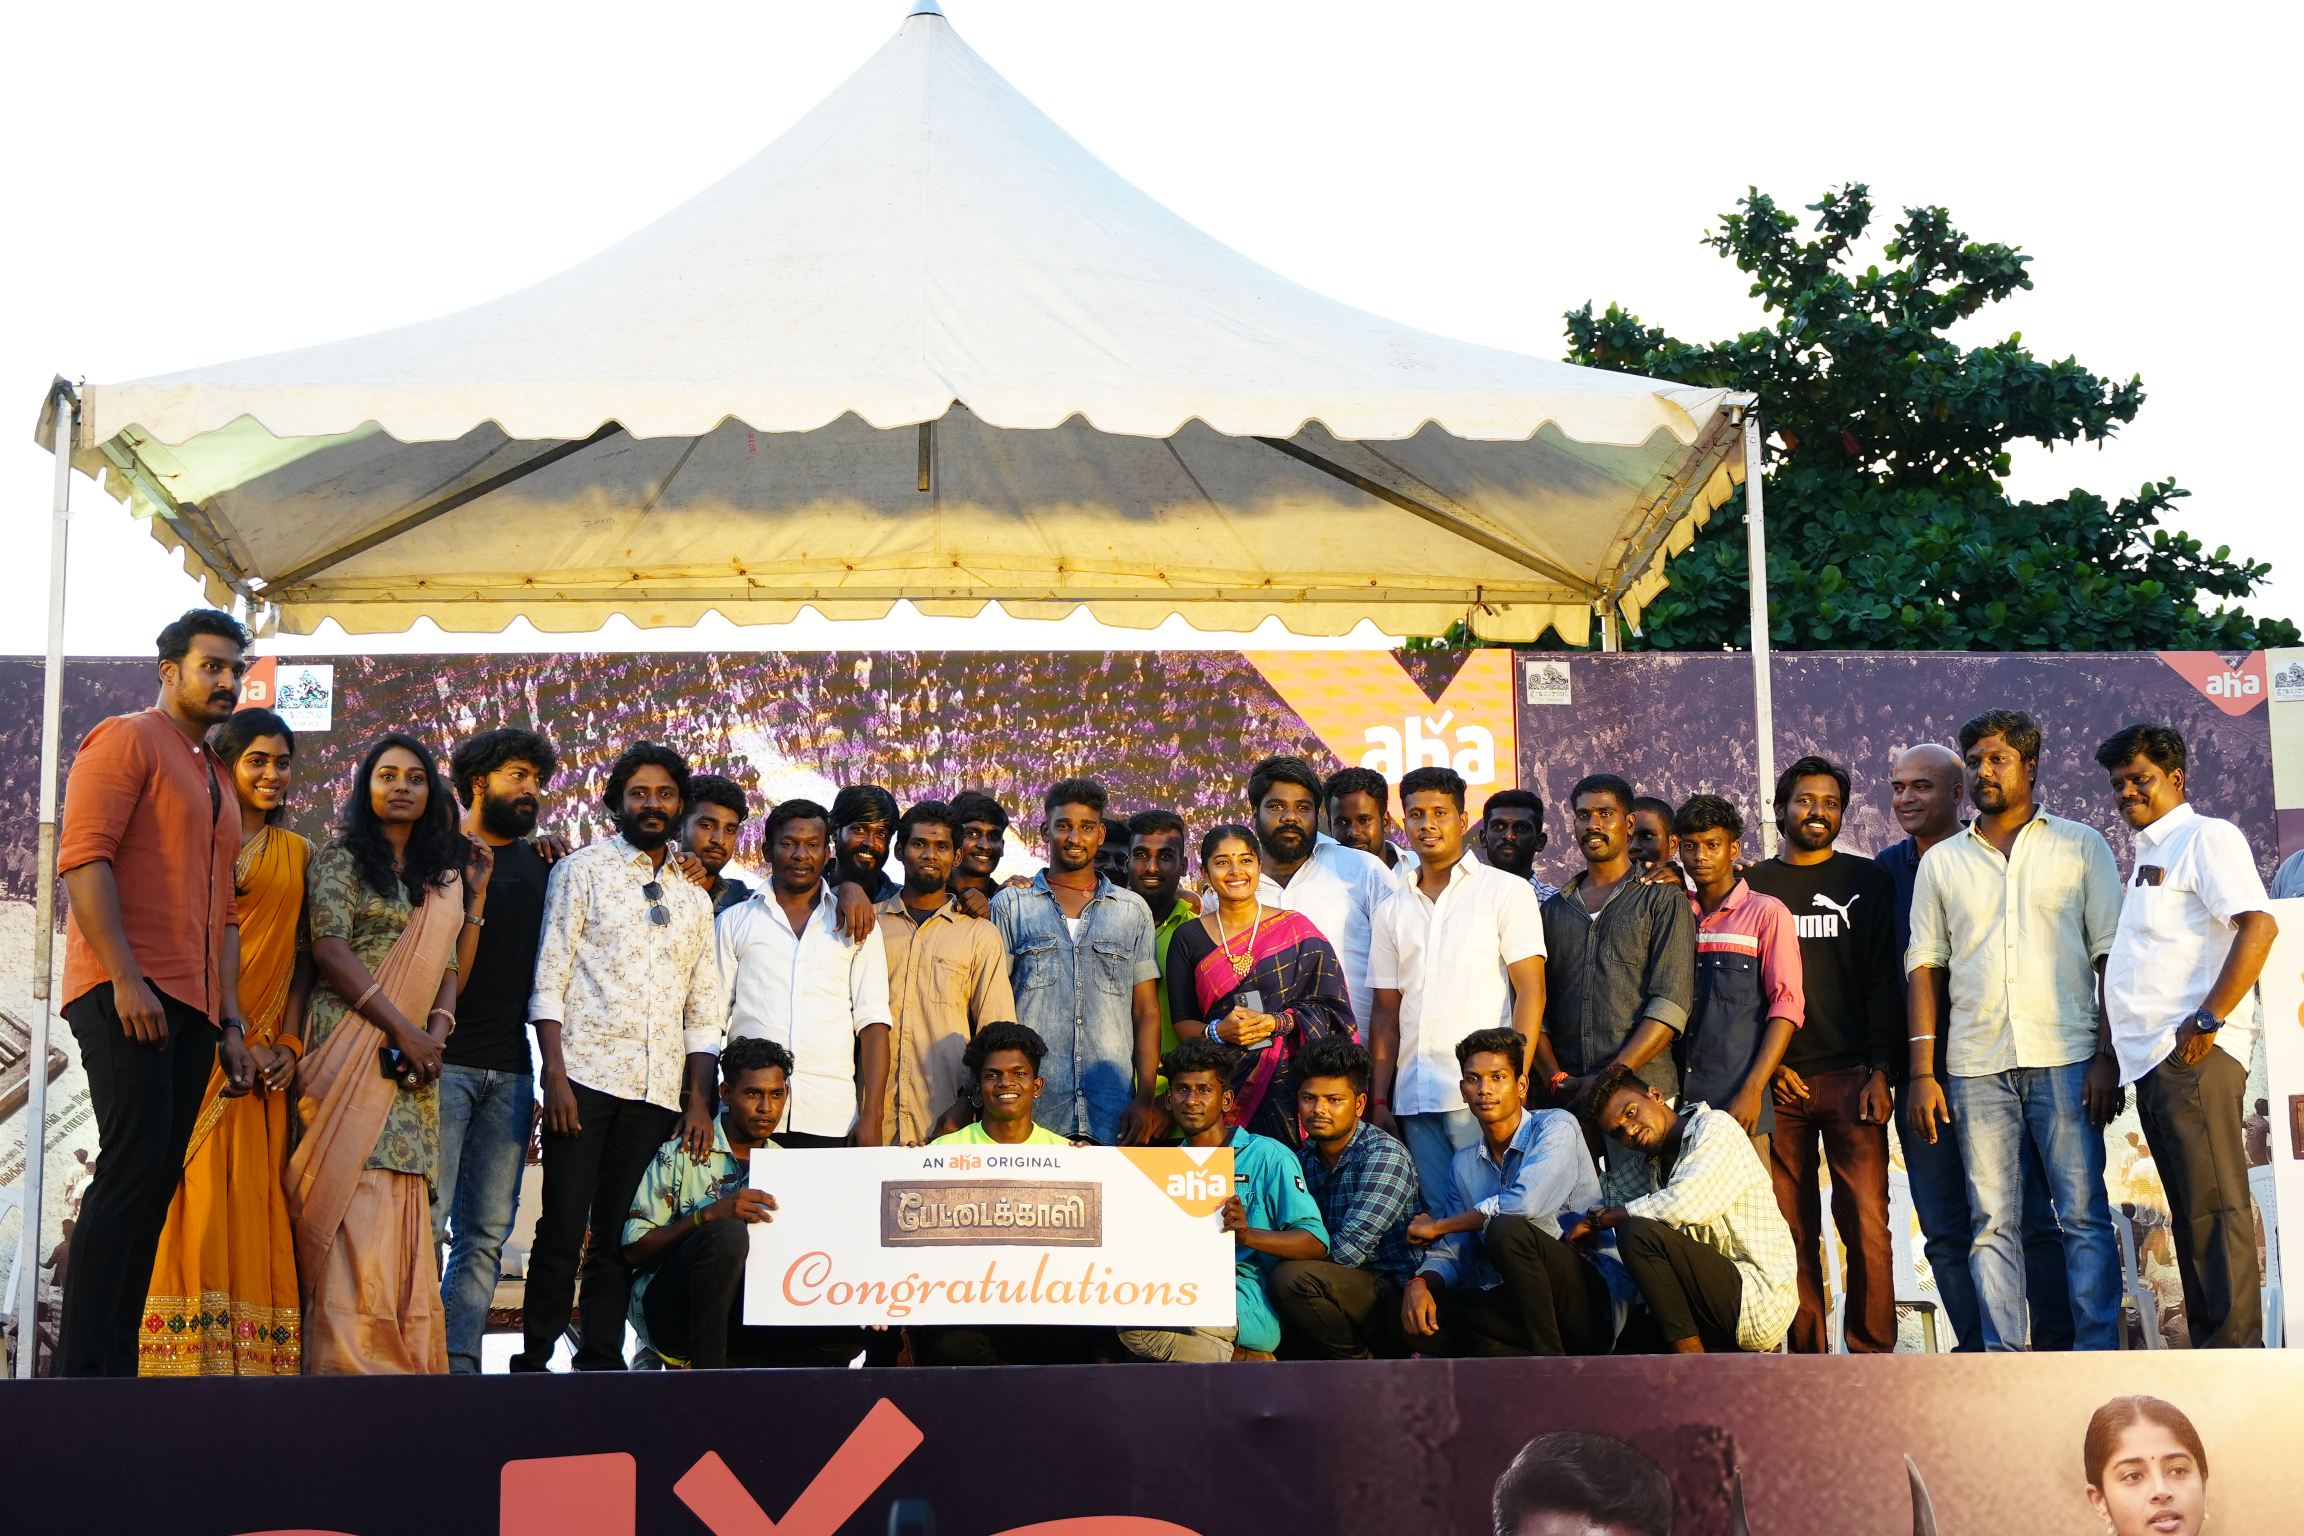 AHA & VETRIMARAN’S MAGNUM OPUS PETTAKAALI TRAILER LAUNCHED WITH ACTUAL JALLIKATTU ACTUAL JALLIKATTU WAS CONDUCTED IN CHENNAI AFTER 40 YEARS TO COMMEMORATE THE TRAILER LAUNCH